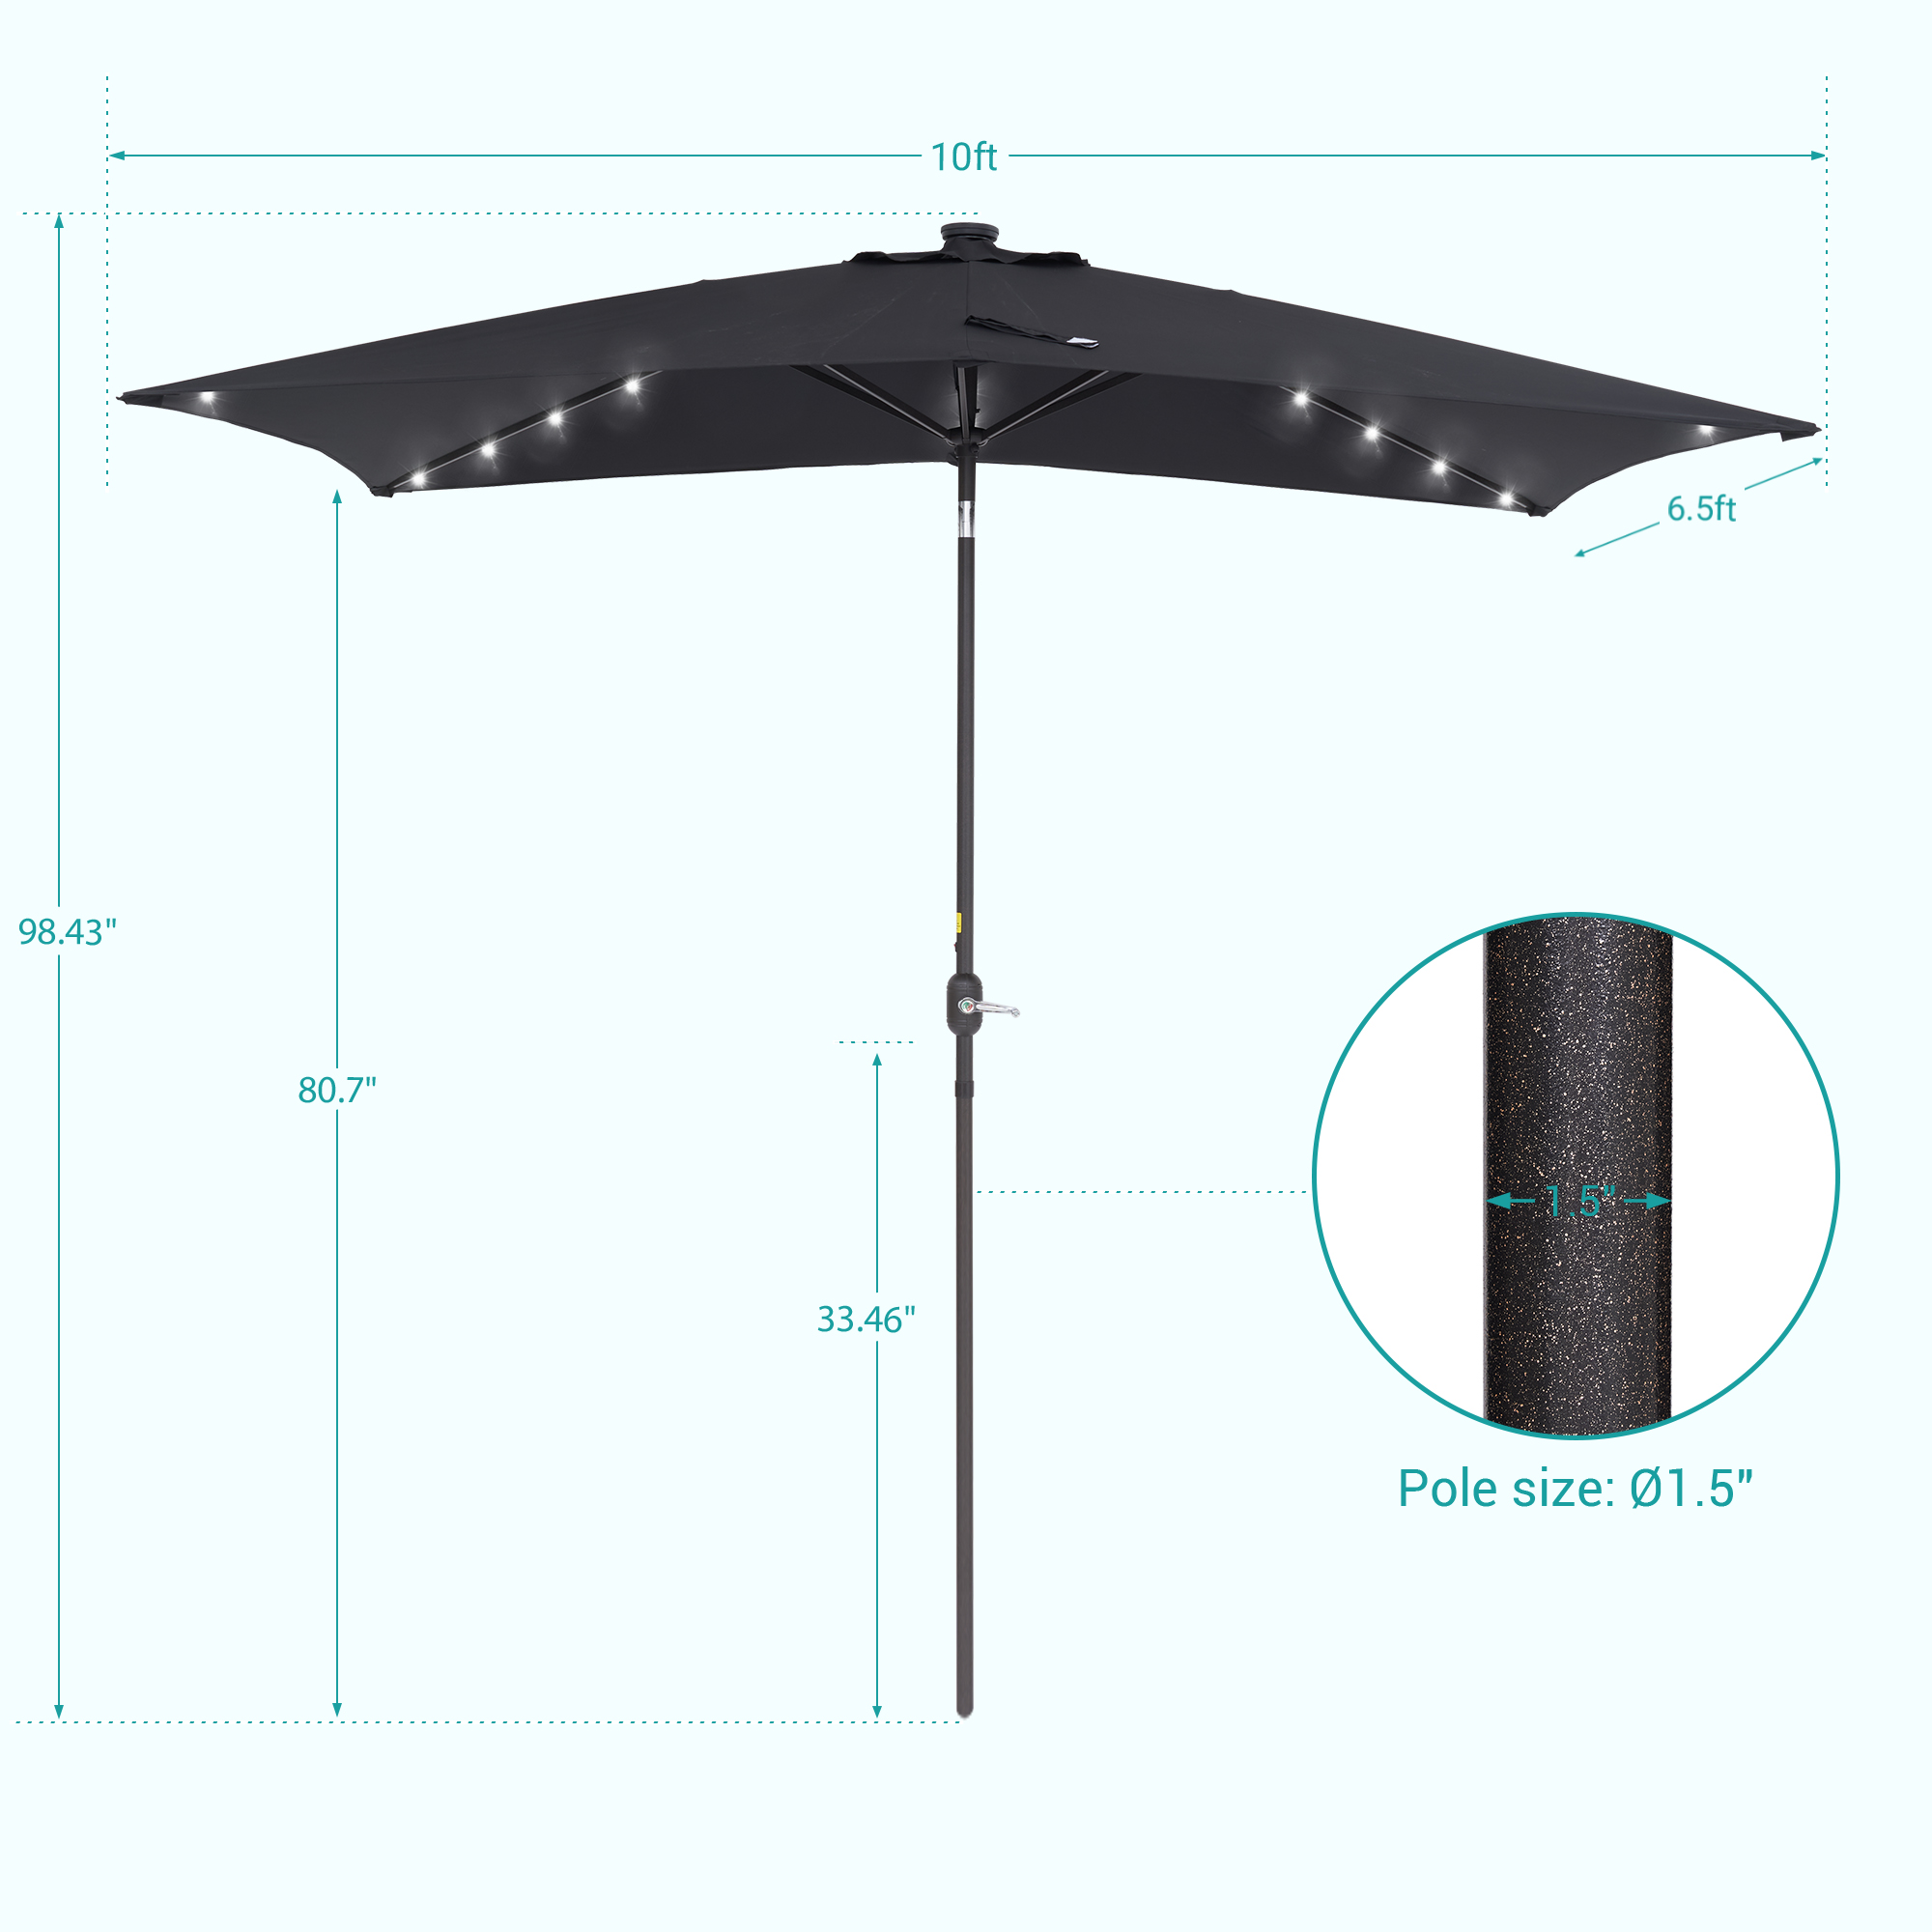 Sonerlic 10x 6.5ft LED Outdoor Patio Rectangular Market Table Umbrella with Steel Frame for Yard, Poolside and Deck,Black